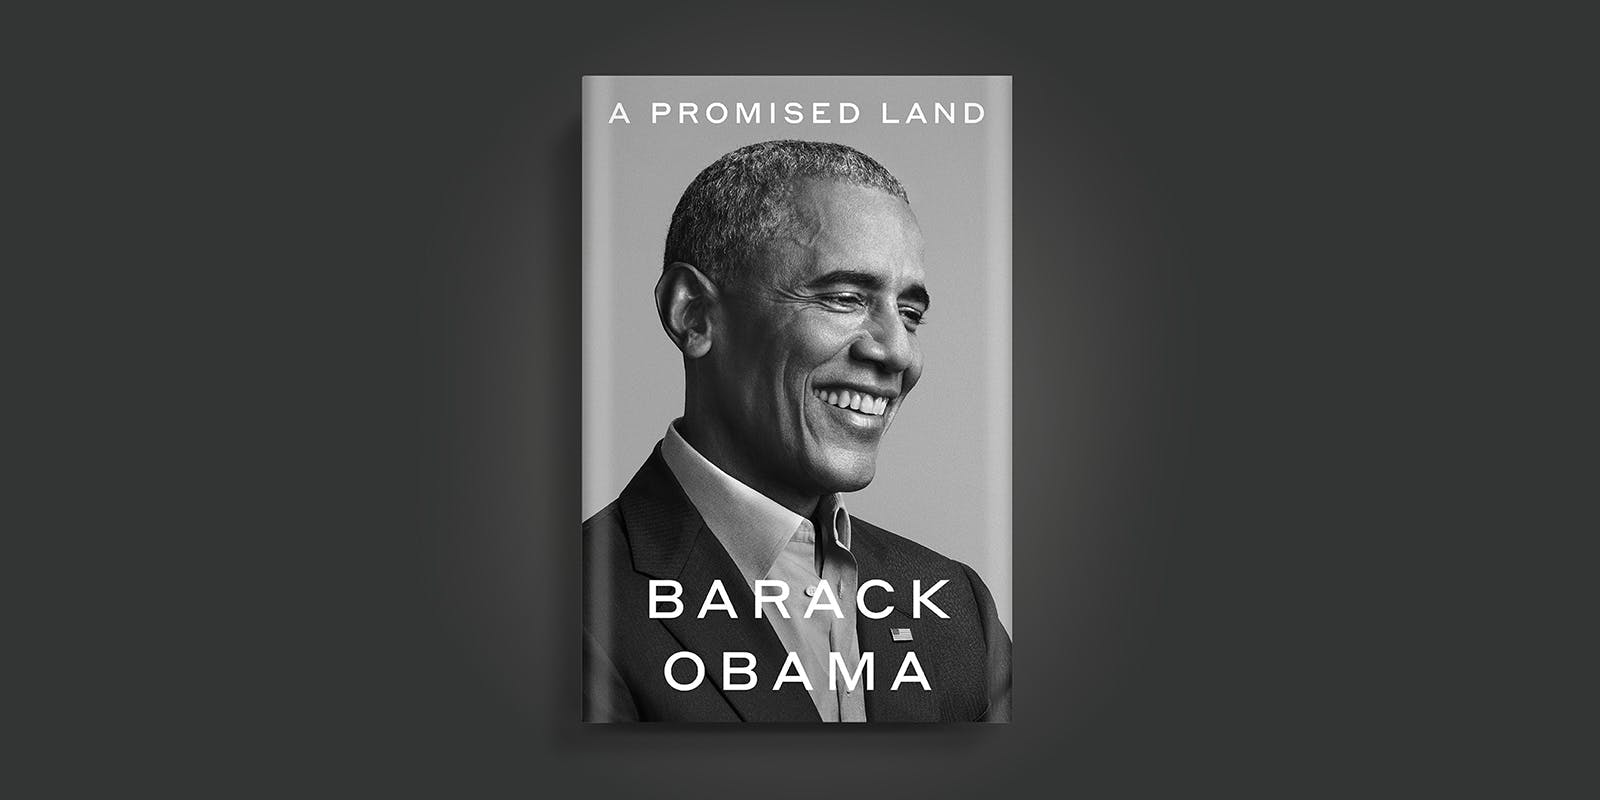 A Promised Land book club notes